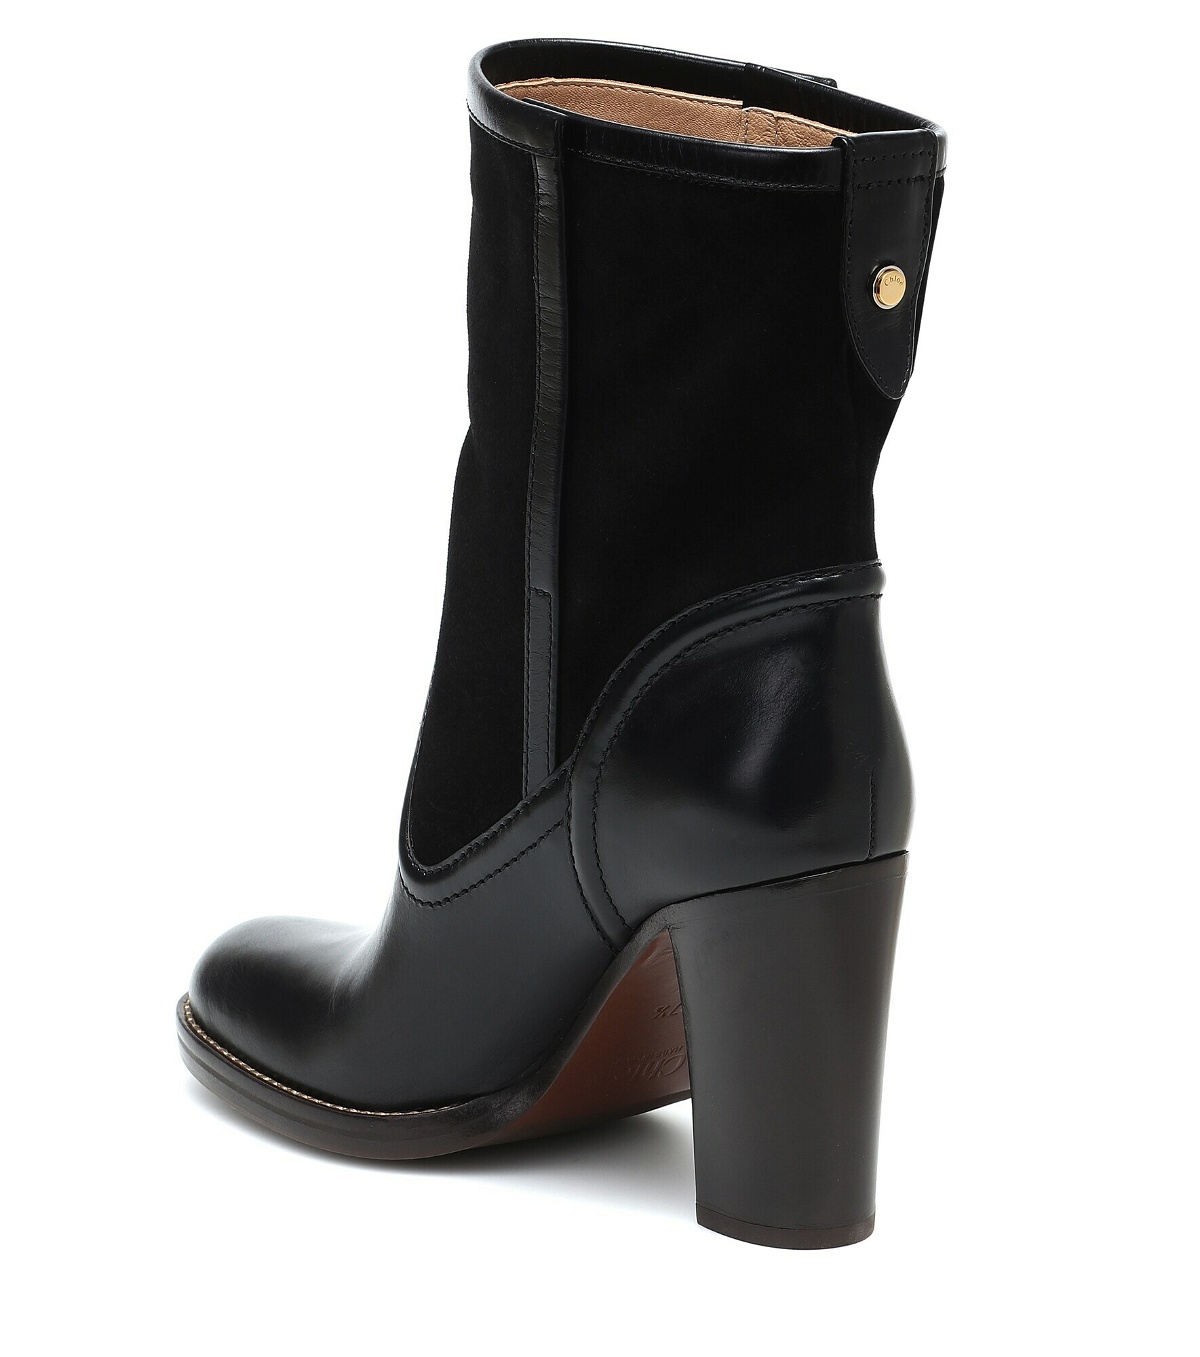 Chloe - Leather and suede ankle boots Chloe